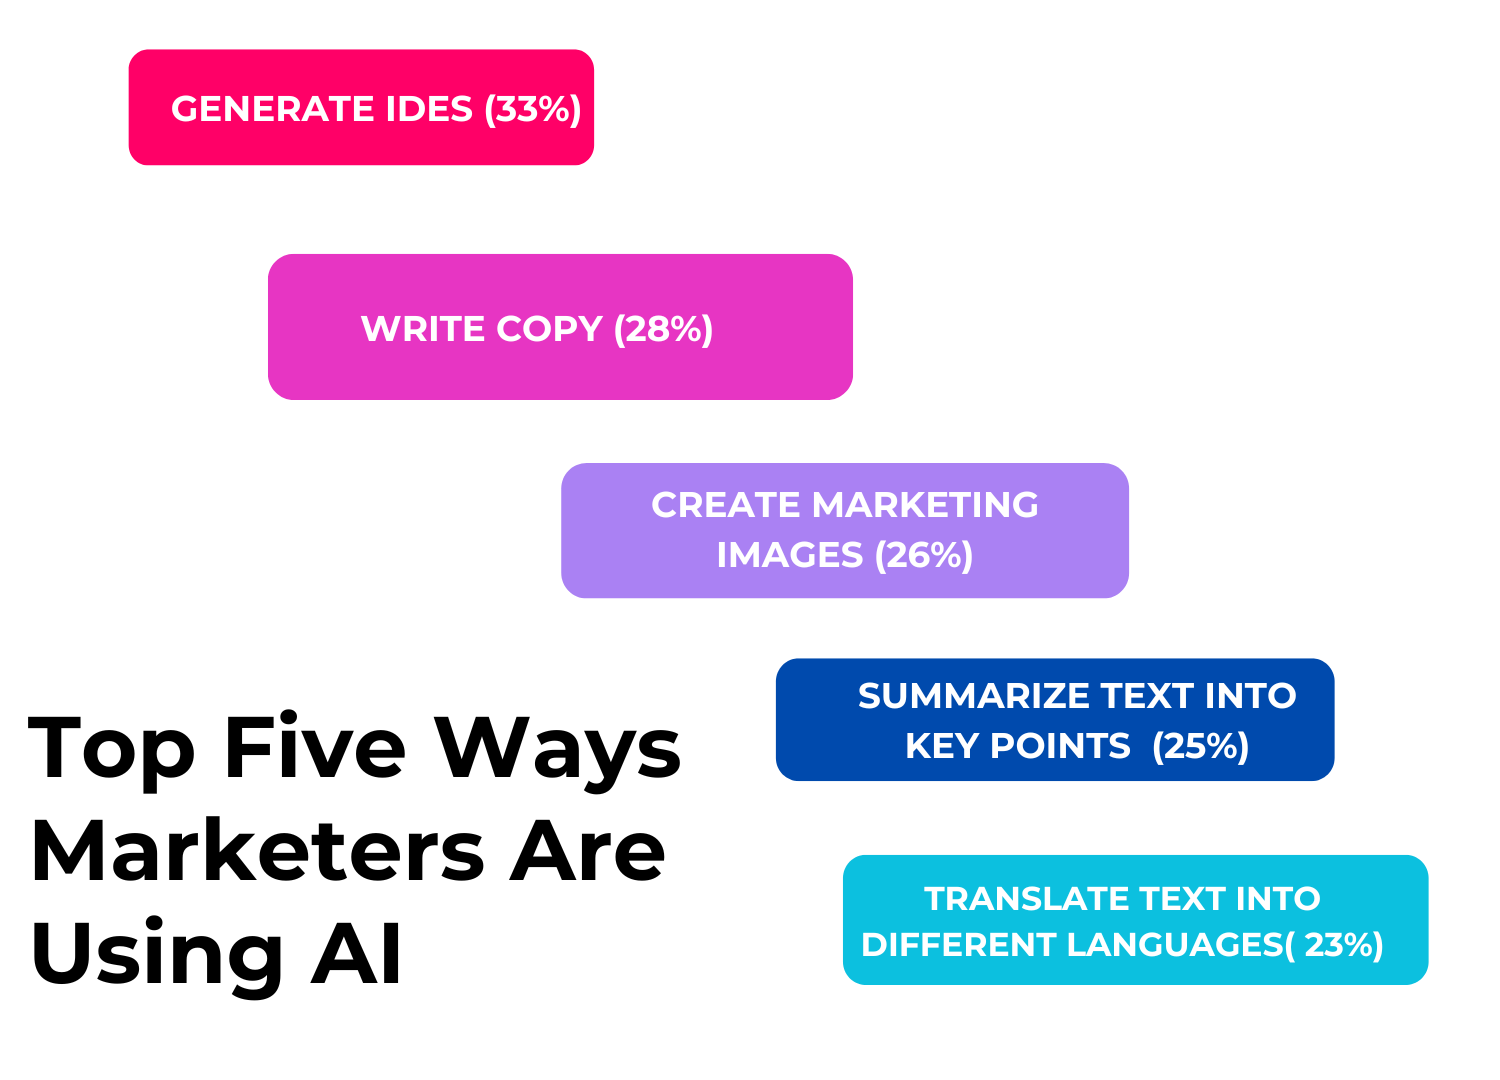 5 ways marketers are using AI